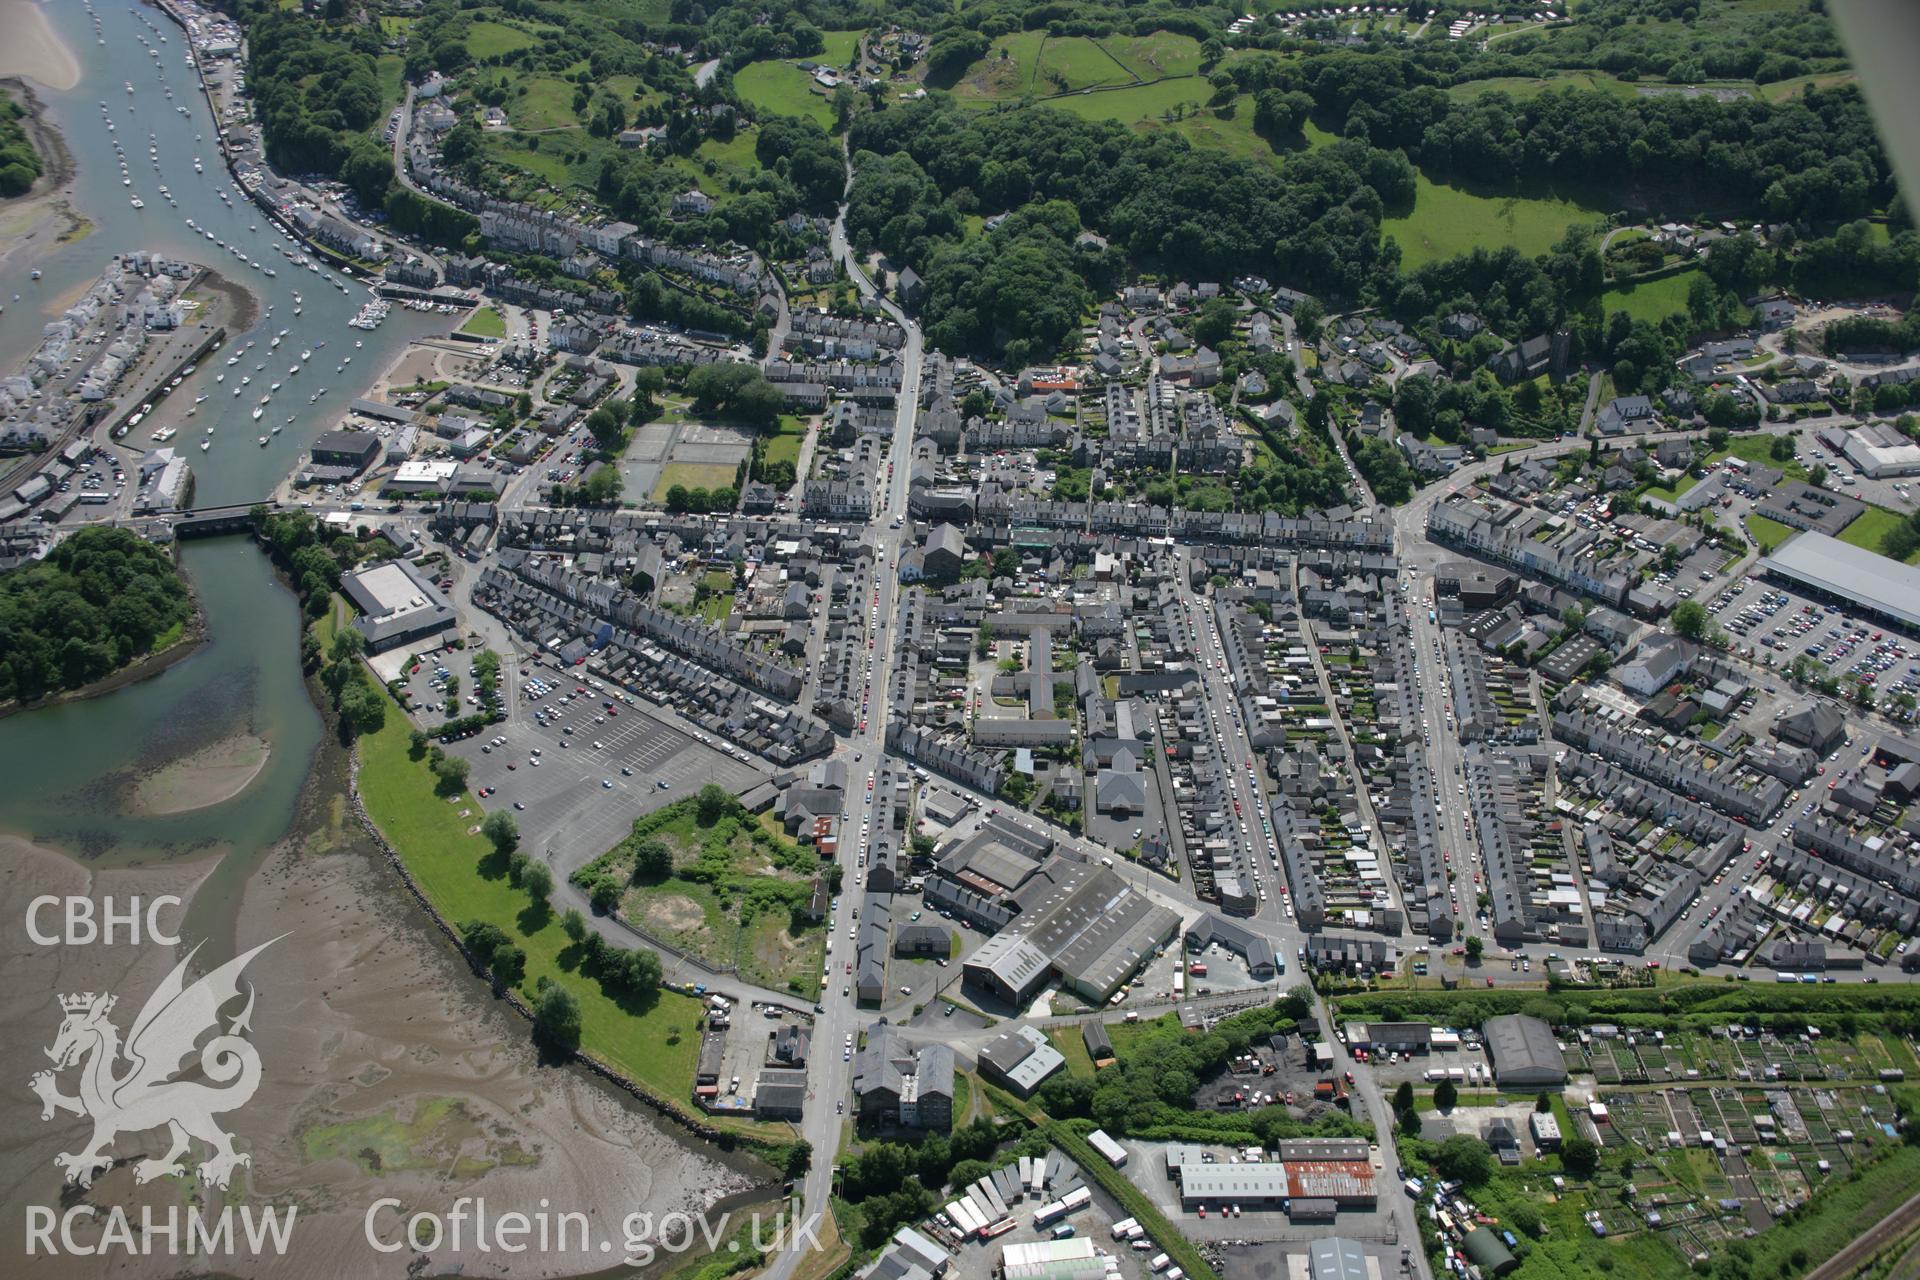 RCAHMW colour oblique aerial photograph of Porthmadog Town from the north-east. Taken on 14 June 2006 by Toby Driver.